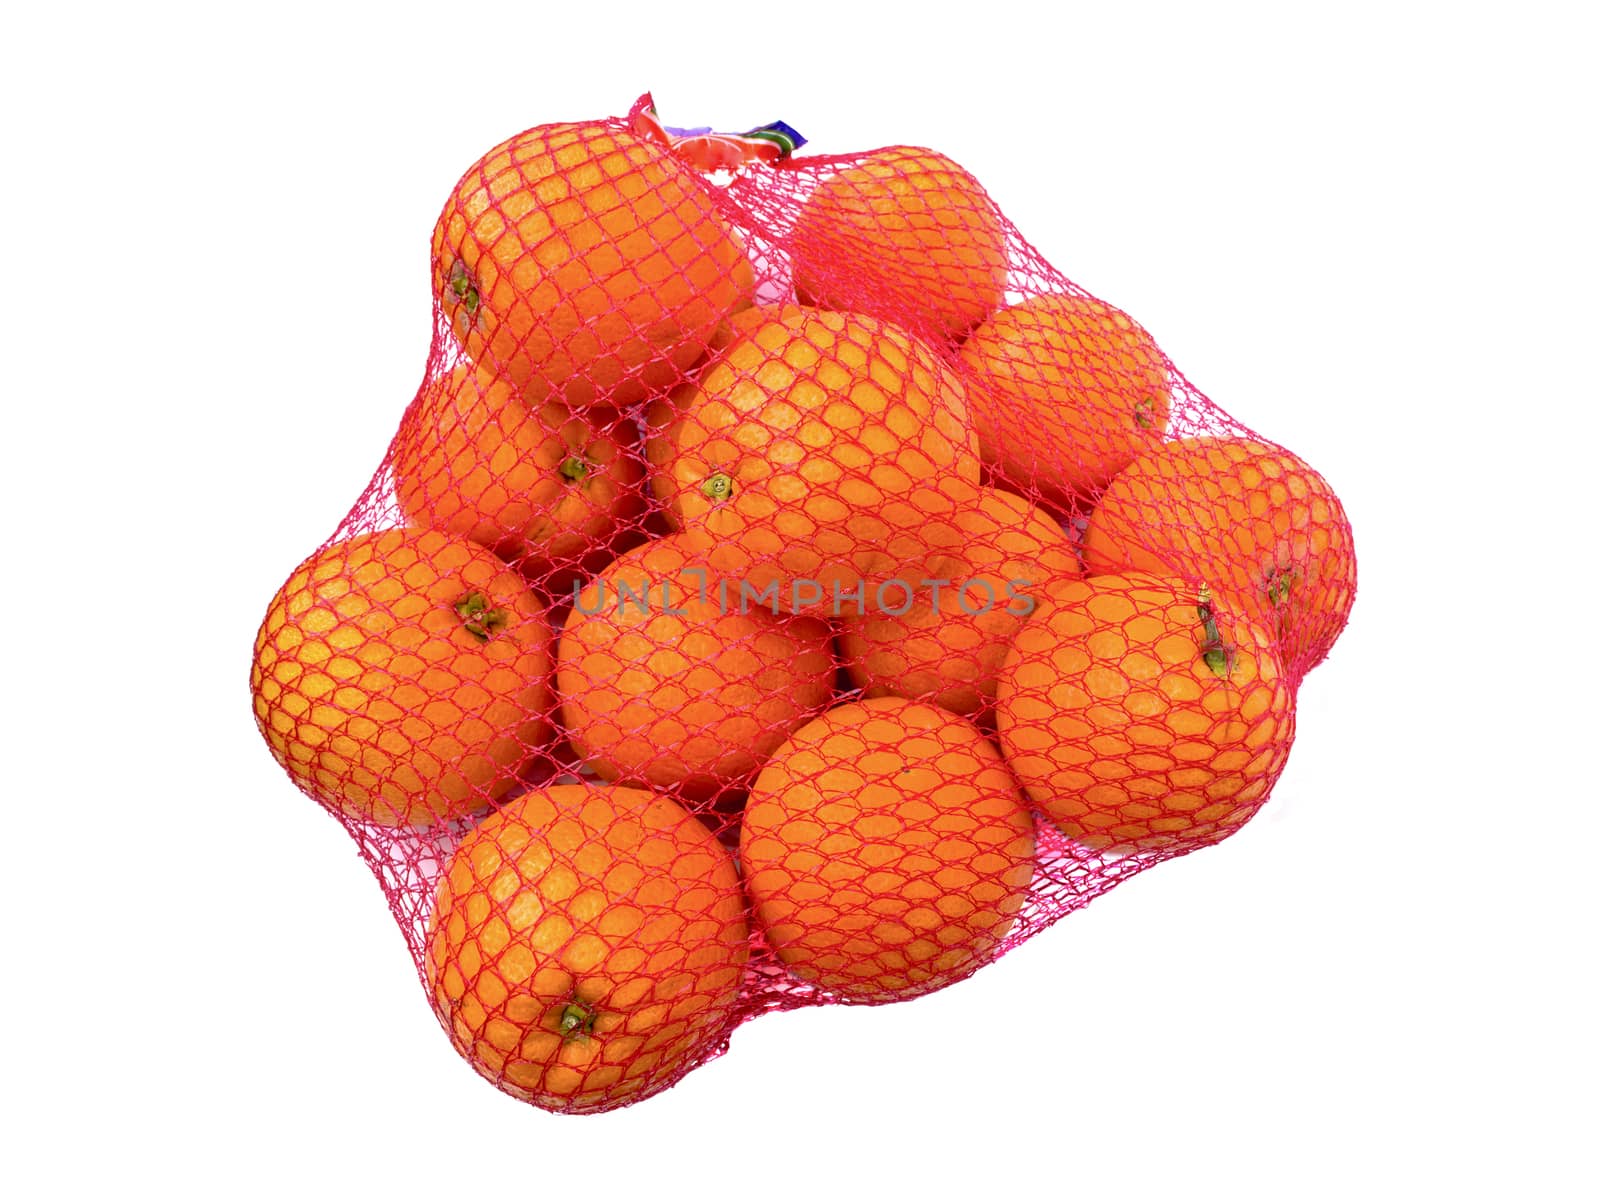 Mesh oranges from the supermarket. Isolated on white background